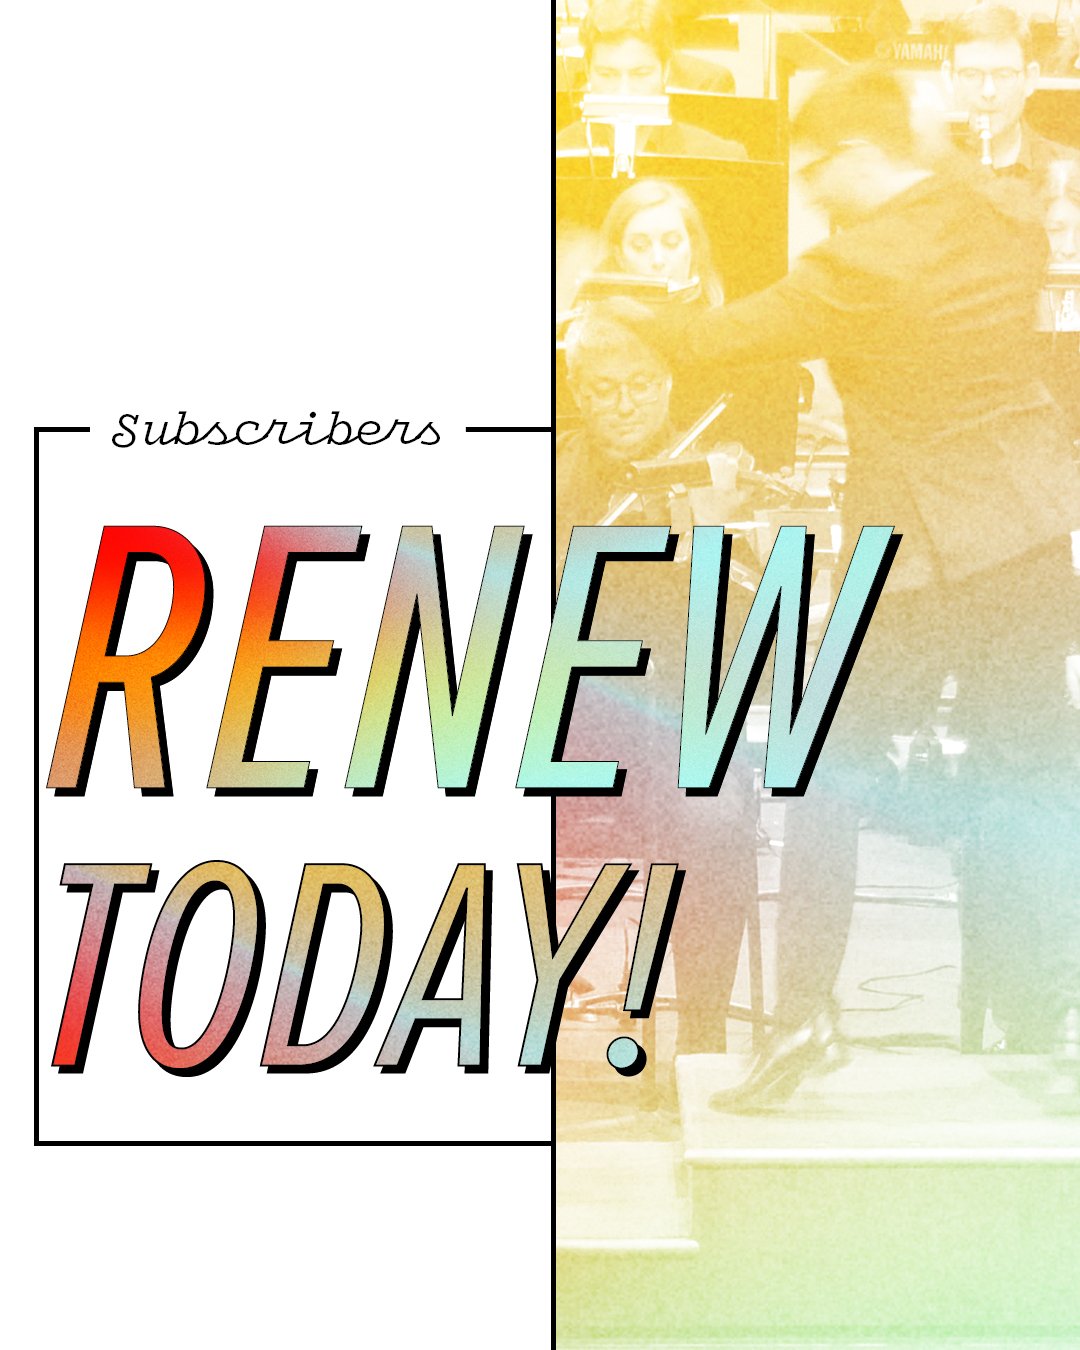 MSO Subscribers can RENEW NOW! 🎉Be first in line for our 2024/25 season and contact the Gallo Center Ticket office to renew. We can't wait to jump into another season with you!